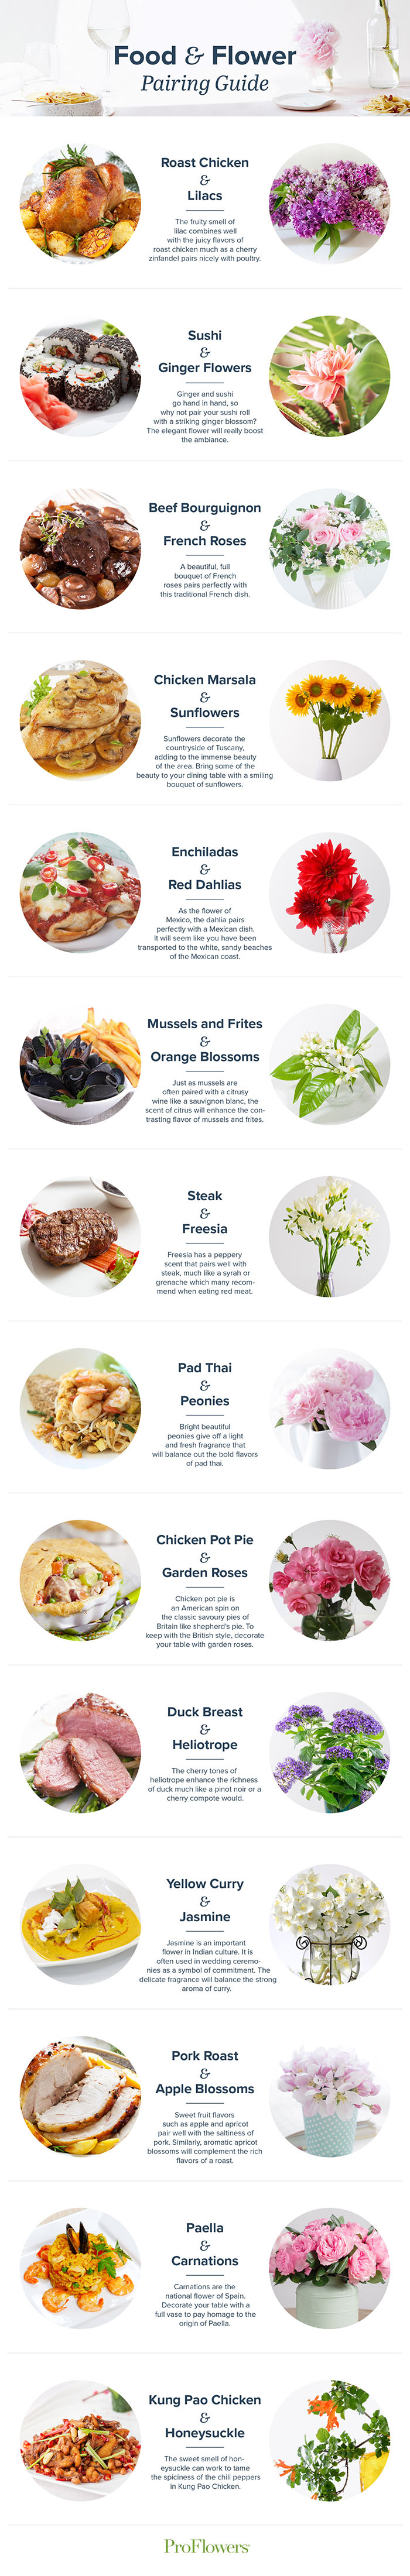 food-and-flower-pairings-check-them-out